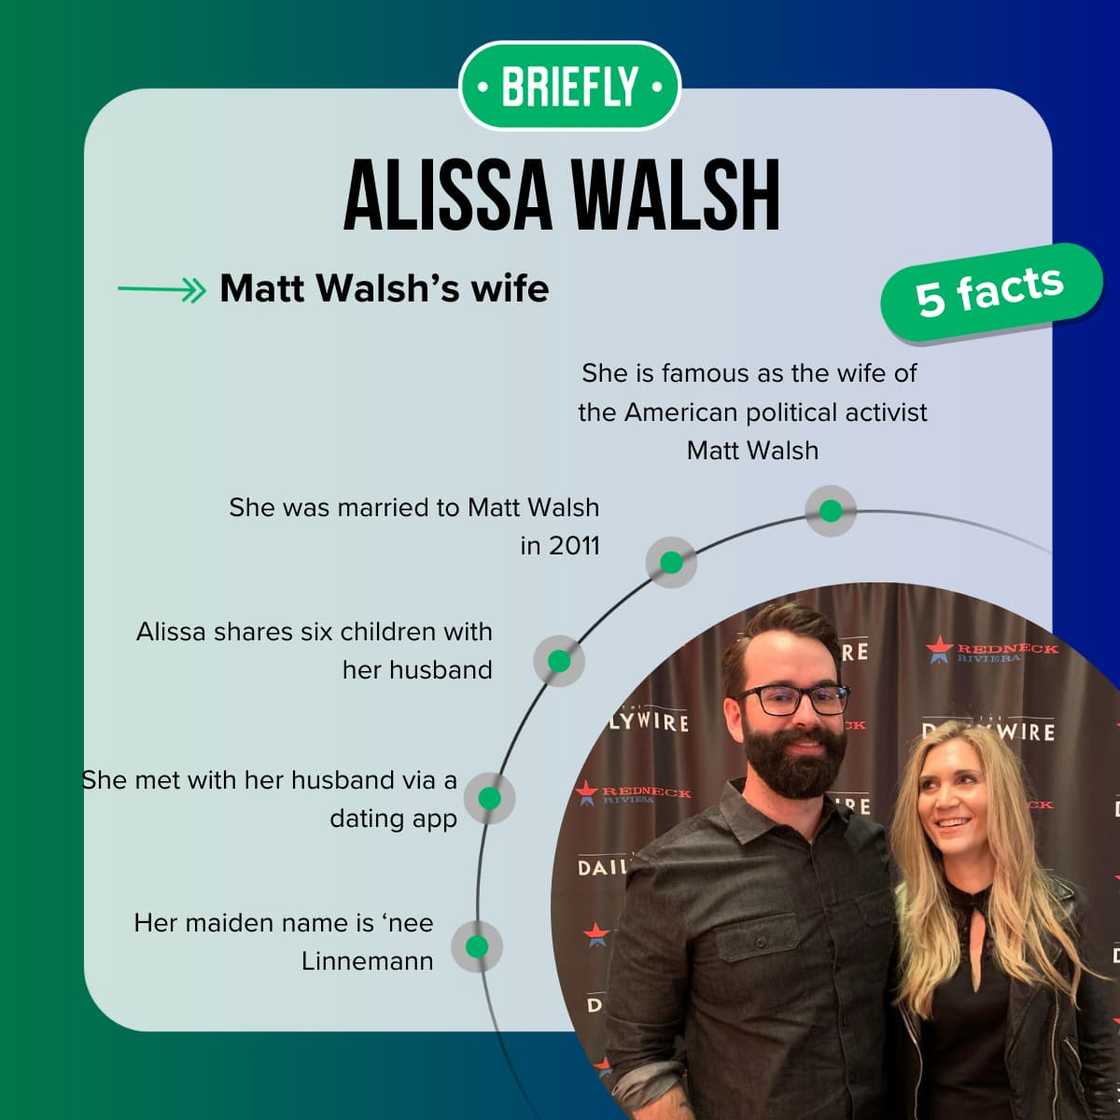 Quick facts about Alissa Walsh